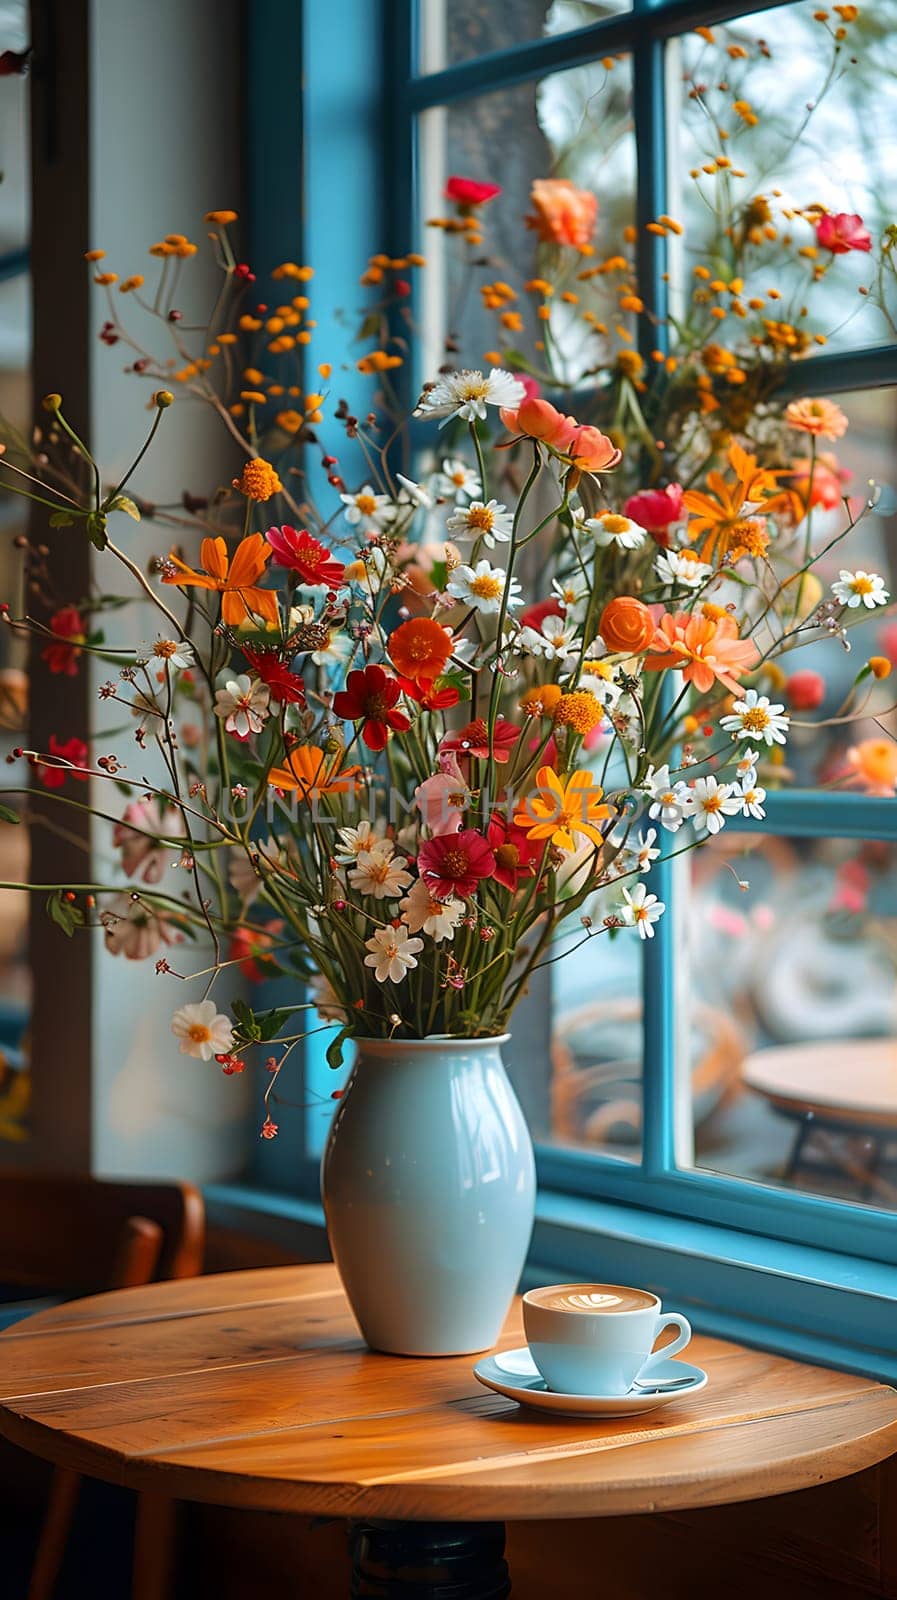 A beautiful blue vase filled with orange flowers sits on a wooden table next to a cup of coffee, adding a fresh touch to the room